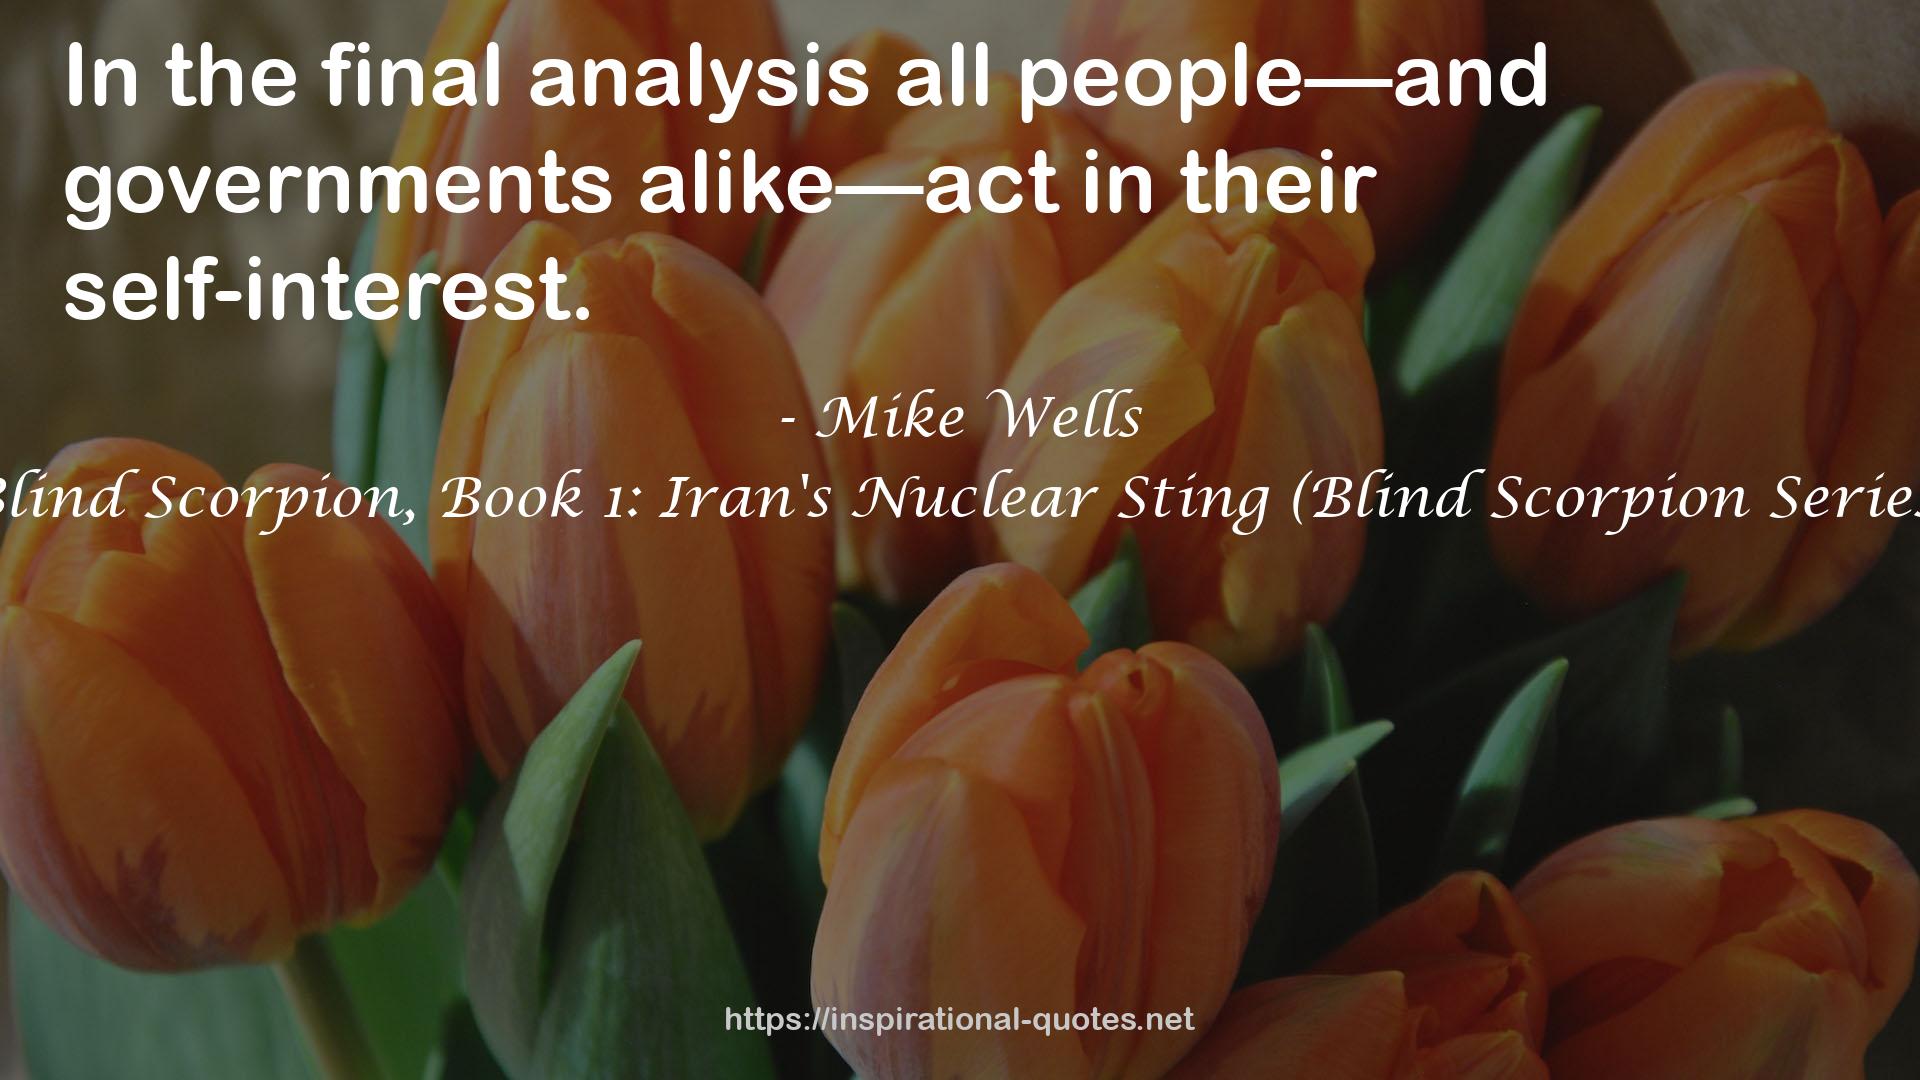 Mike Wells QUOTES